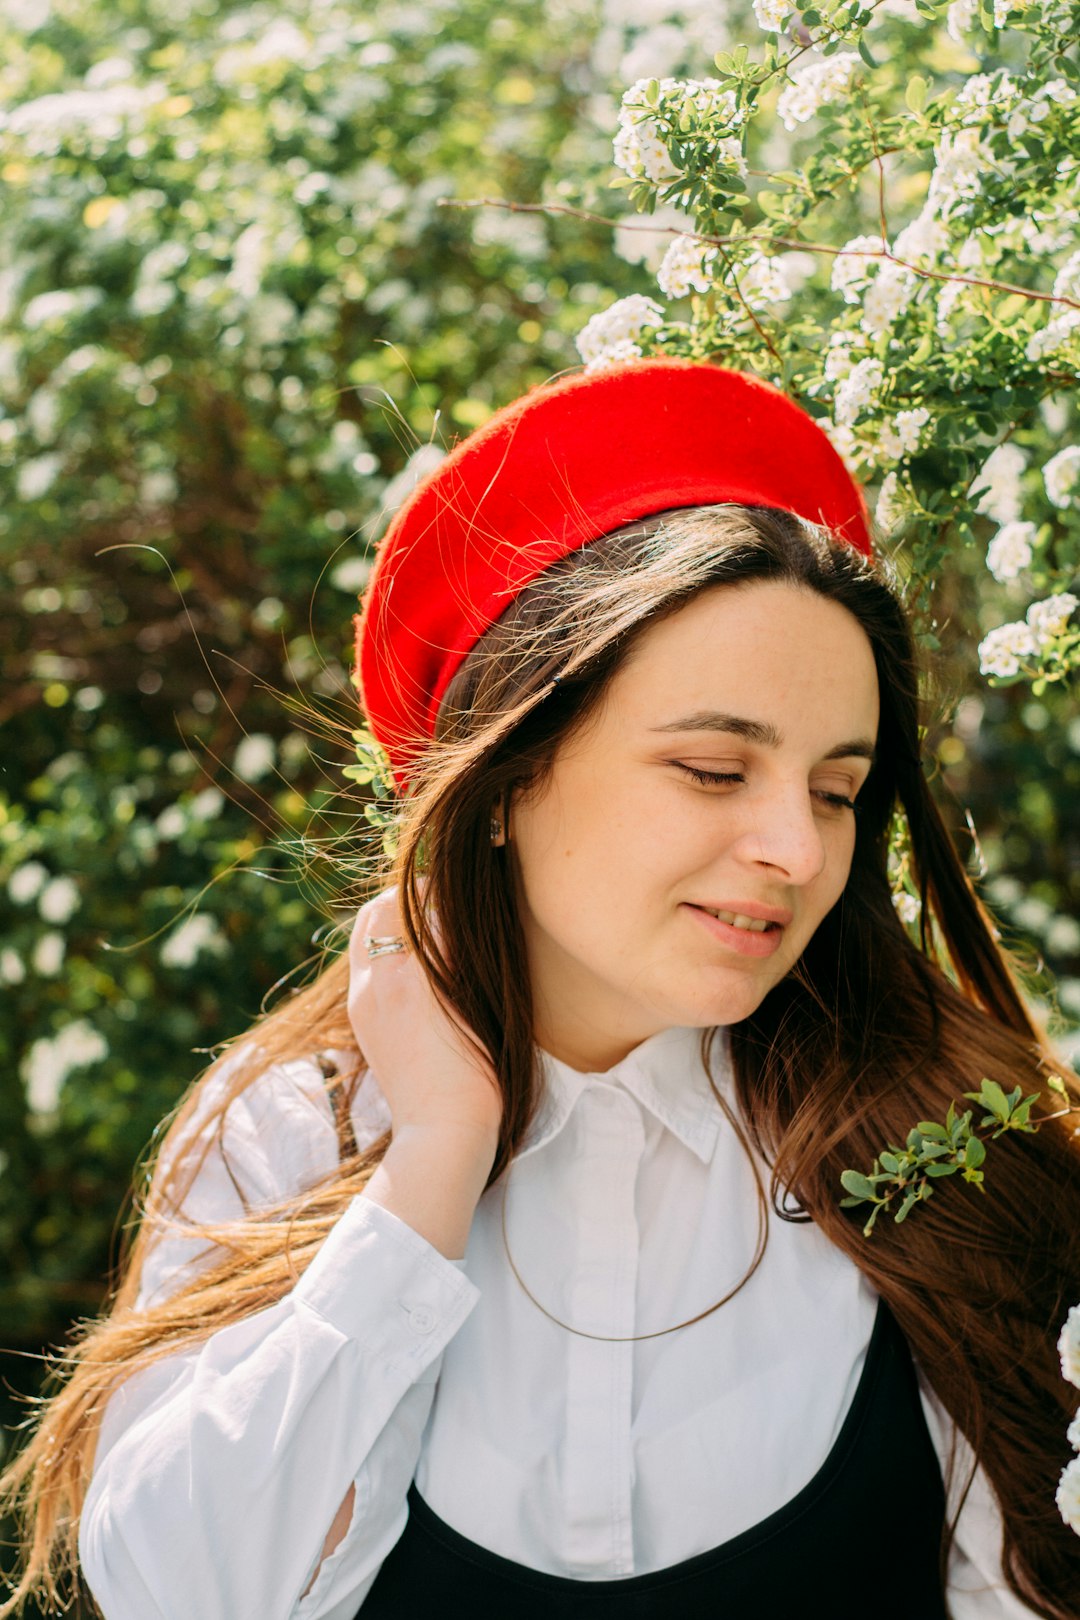 woman in white button up shirt wearing red hat